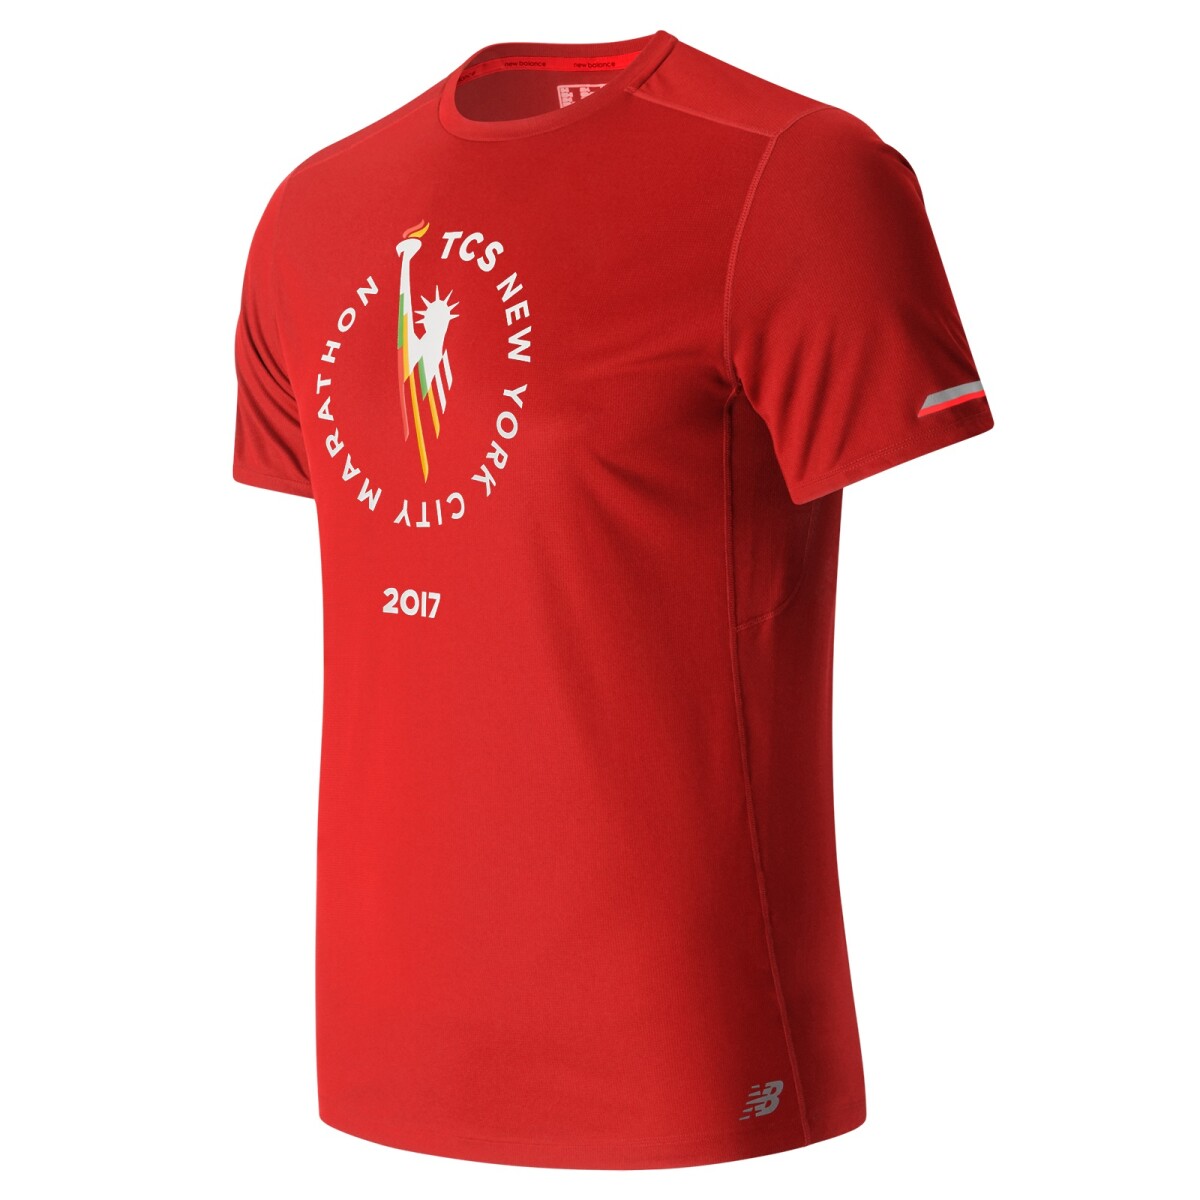 Remera New Balance Hombre MT63223VENR NB ICE SS - ENERGY RED 